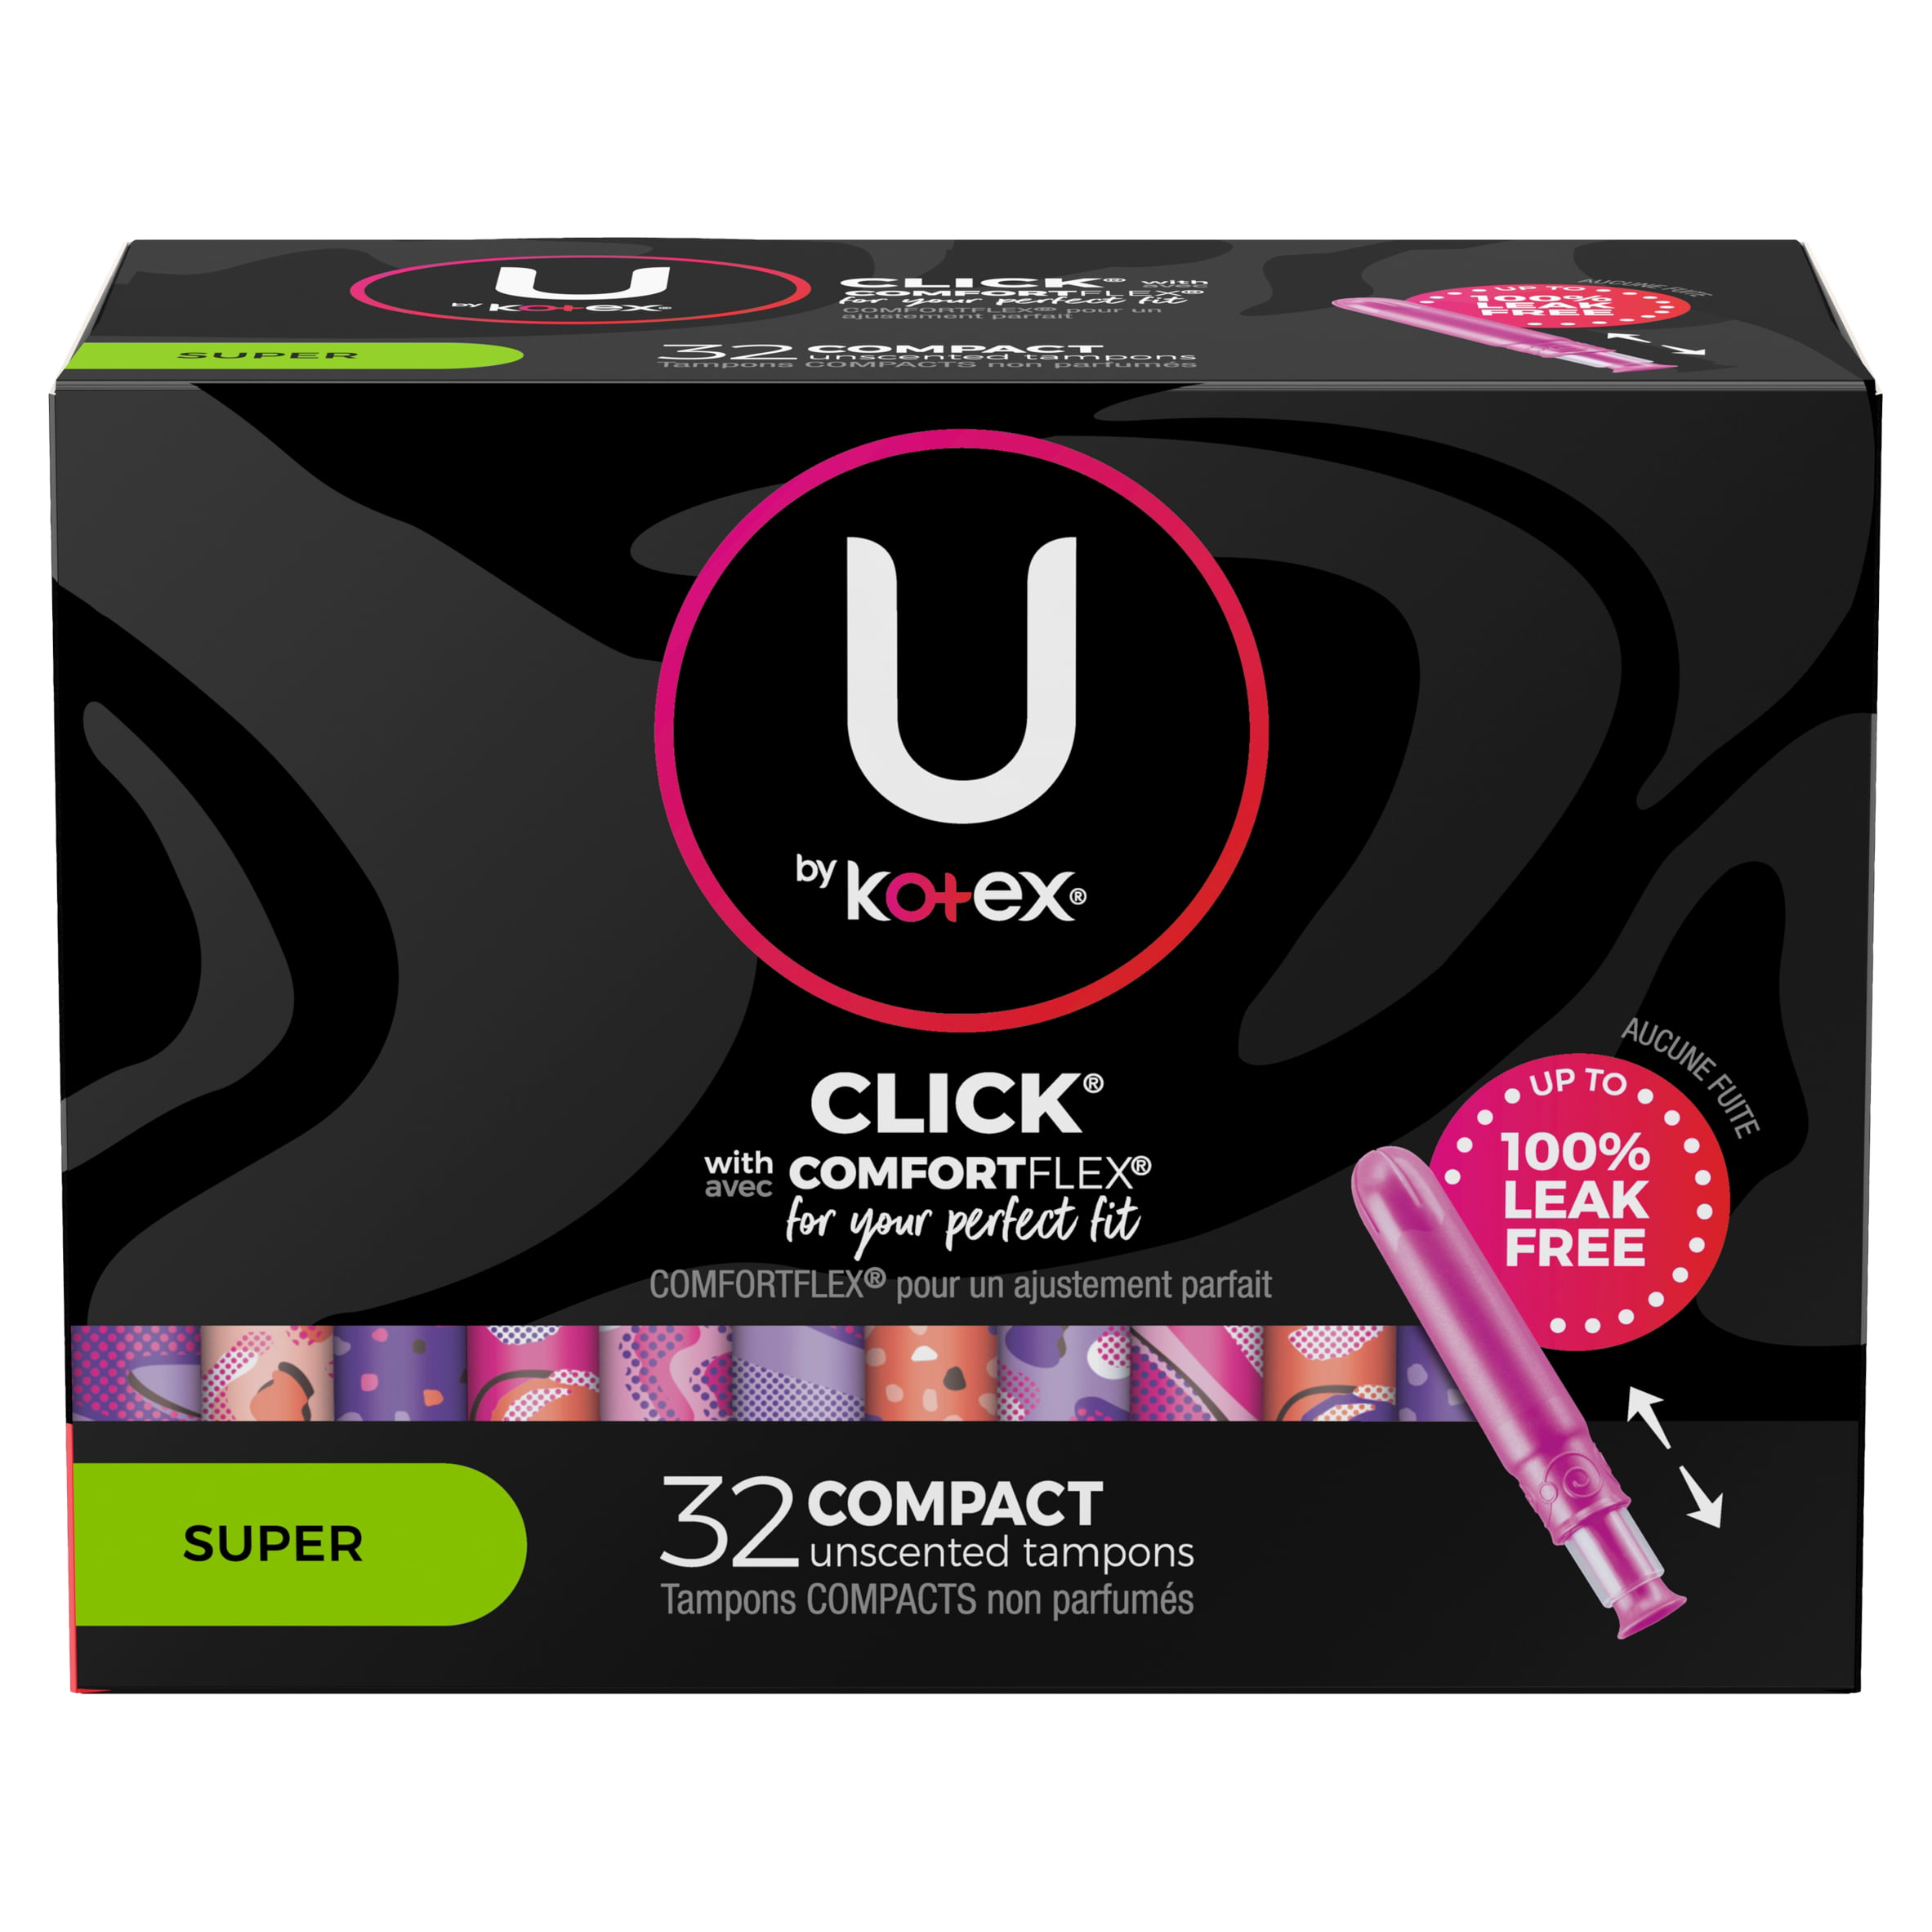 kotex tampons unscented